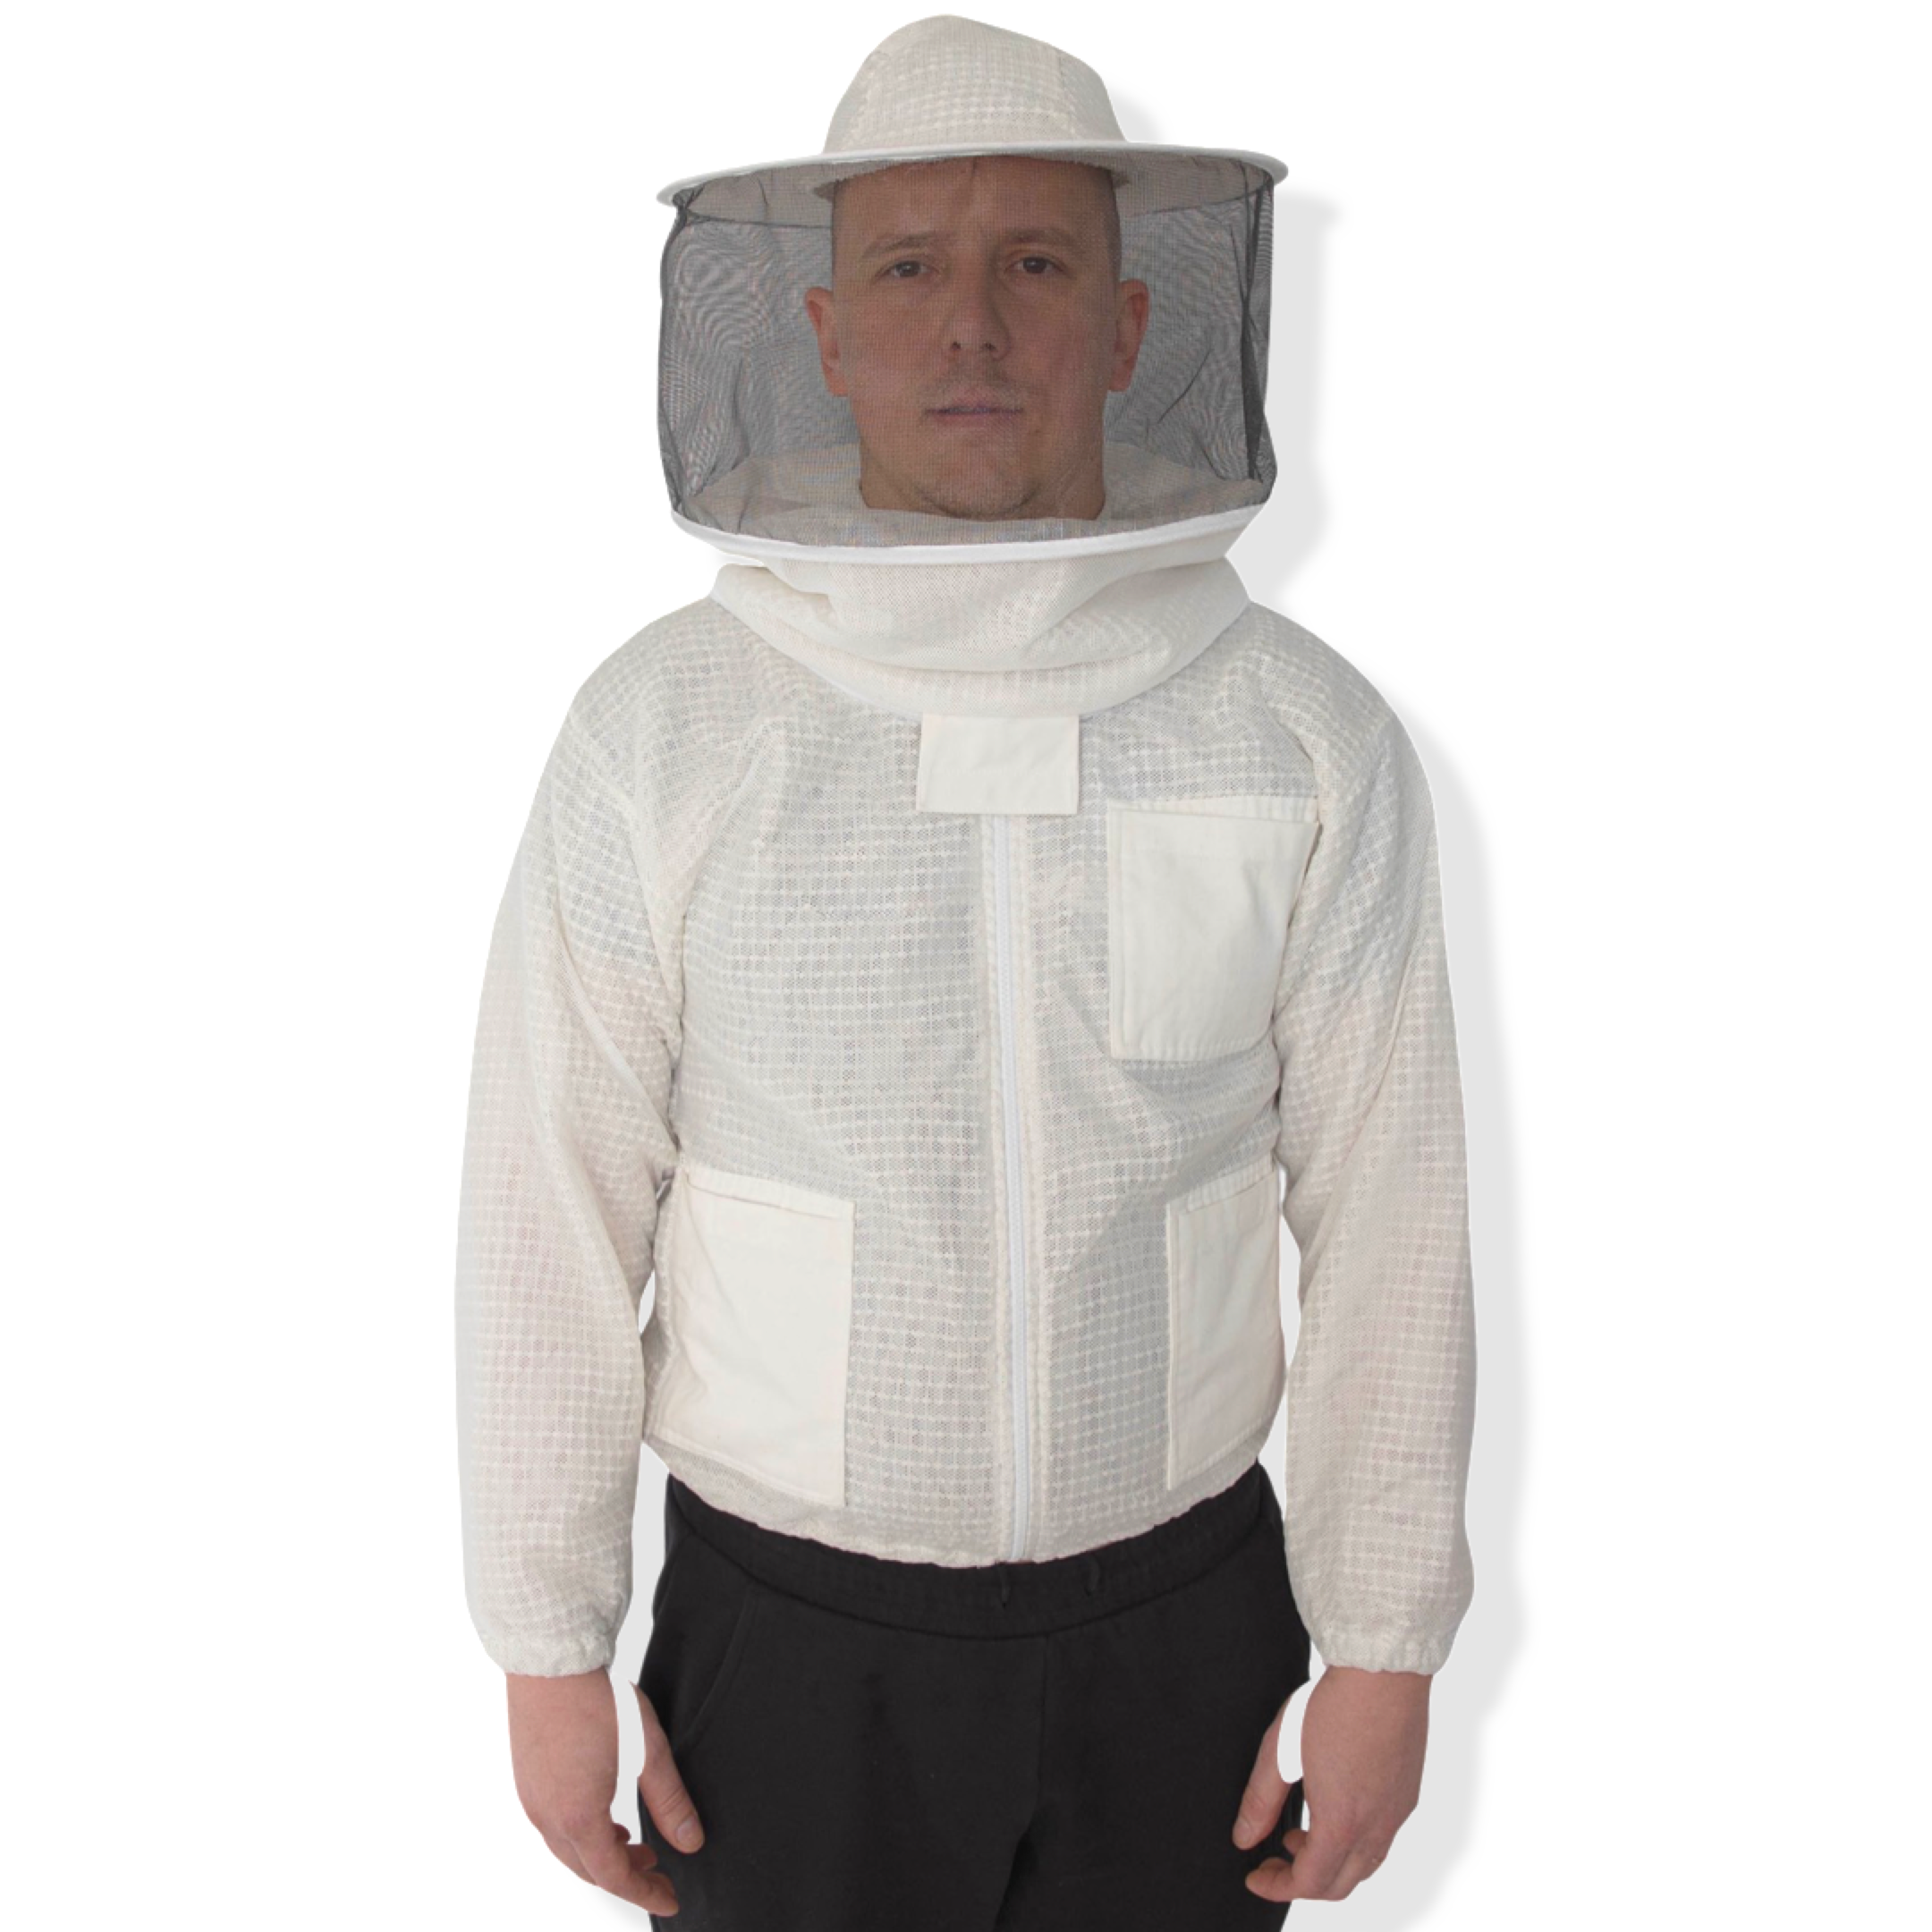 Bee Keeper Suit Beekeeping Veil Jacket Protection Outfit Hat Sting Proof M L XL 